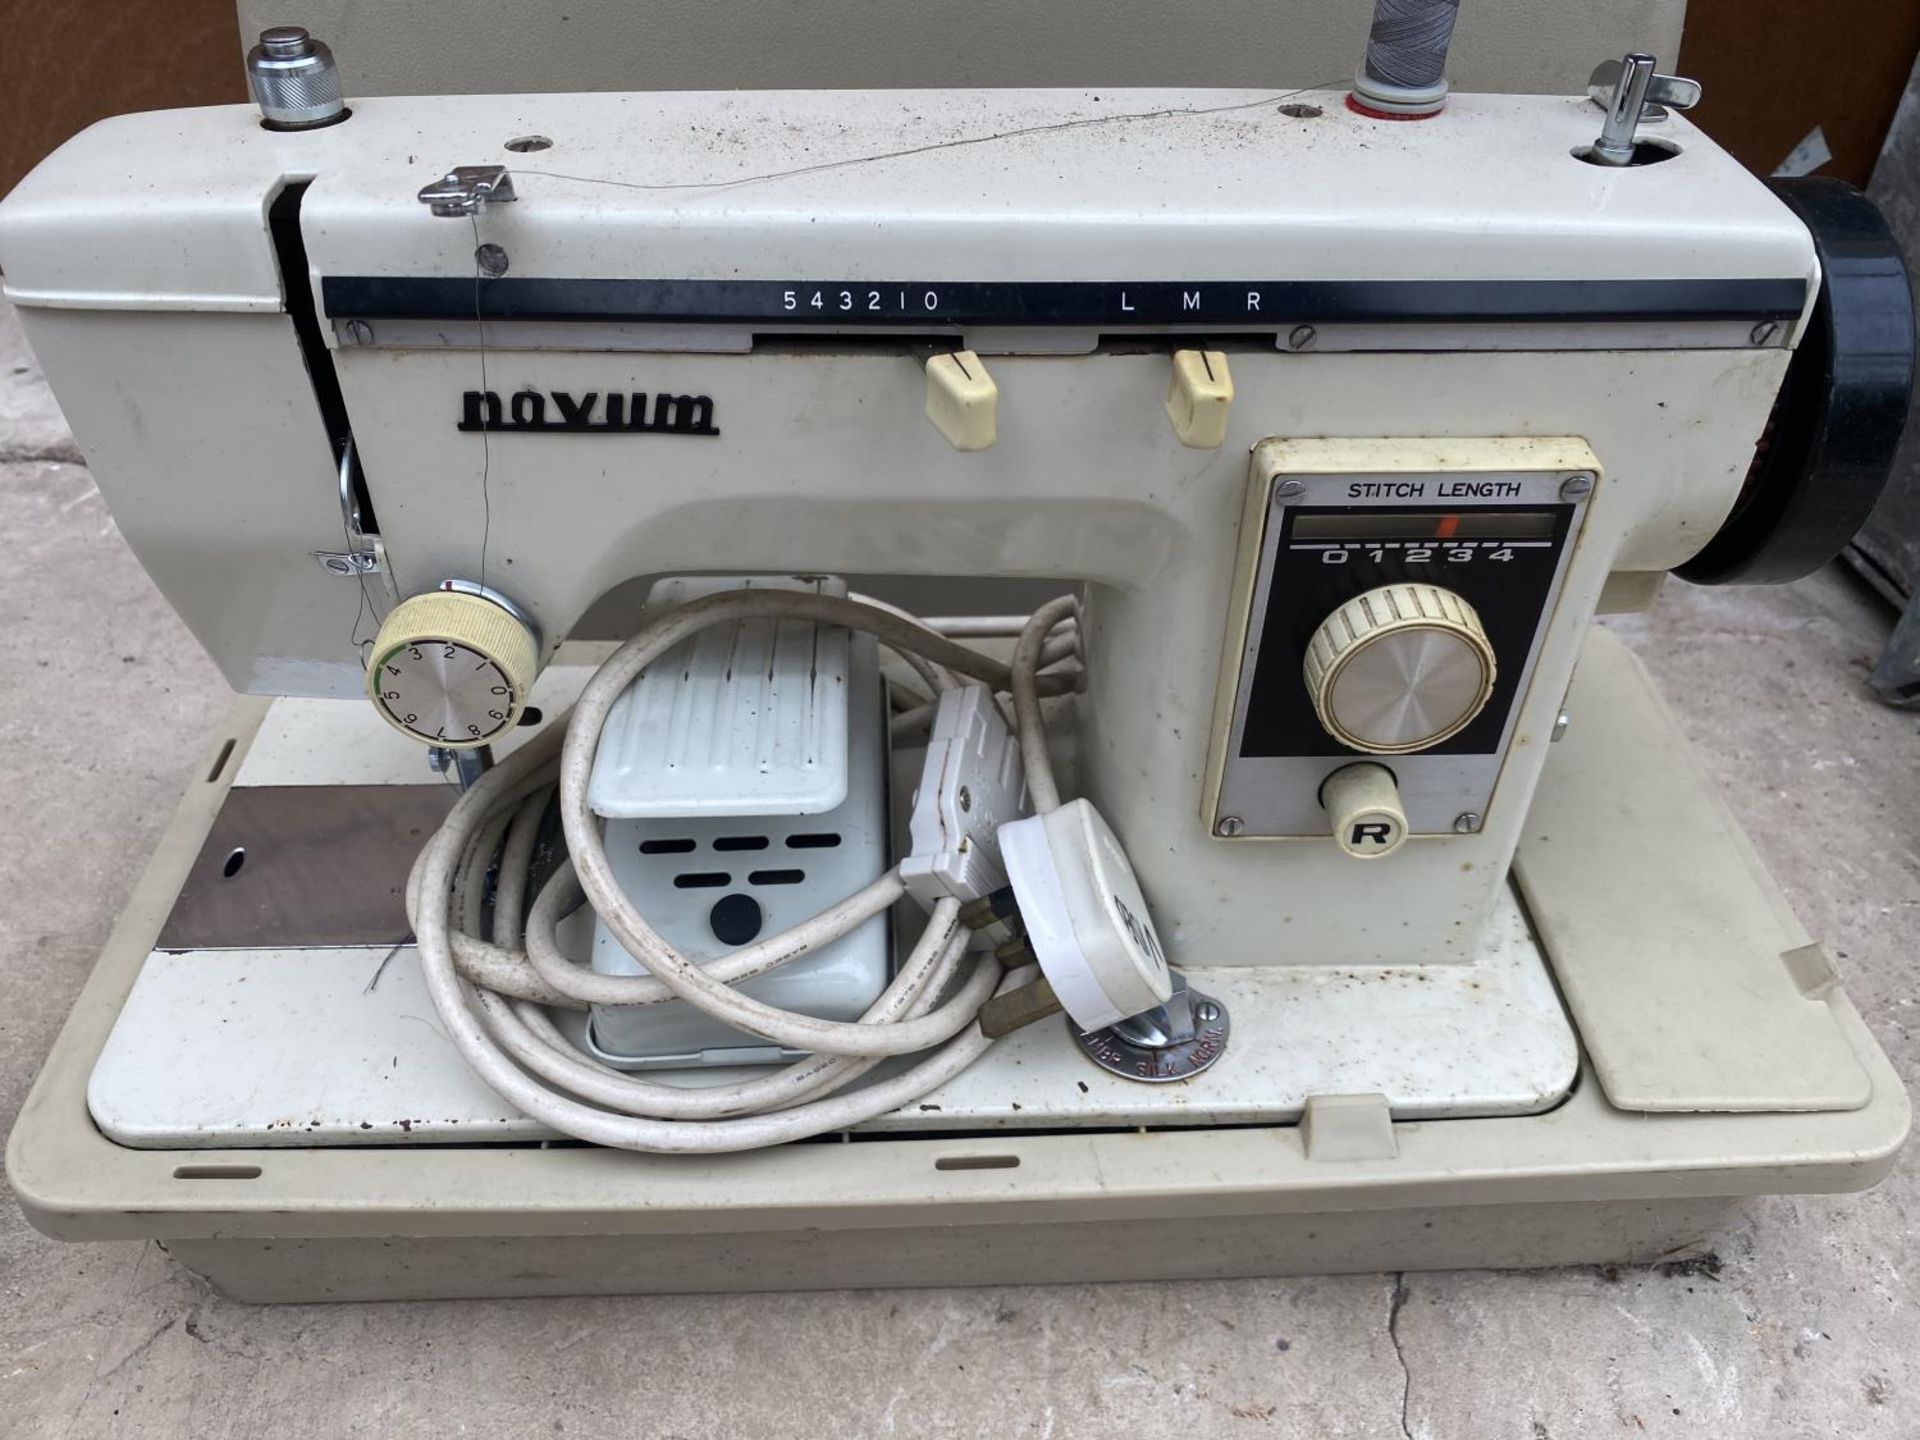 A RETRO NOVUM SEWING MACHINE WITH CASE - Image 2 of 3